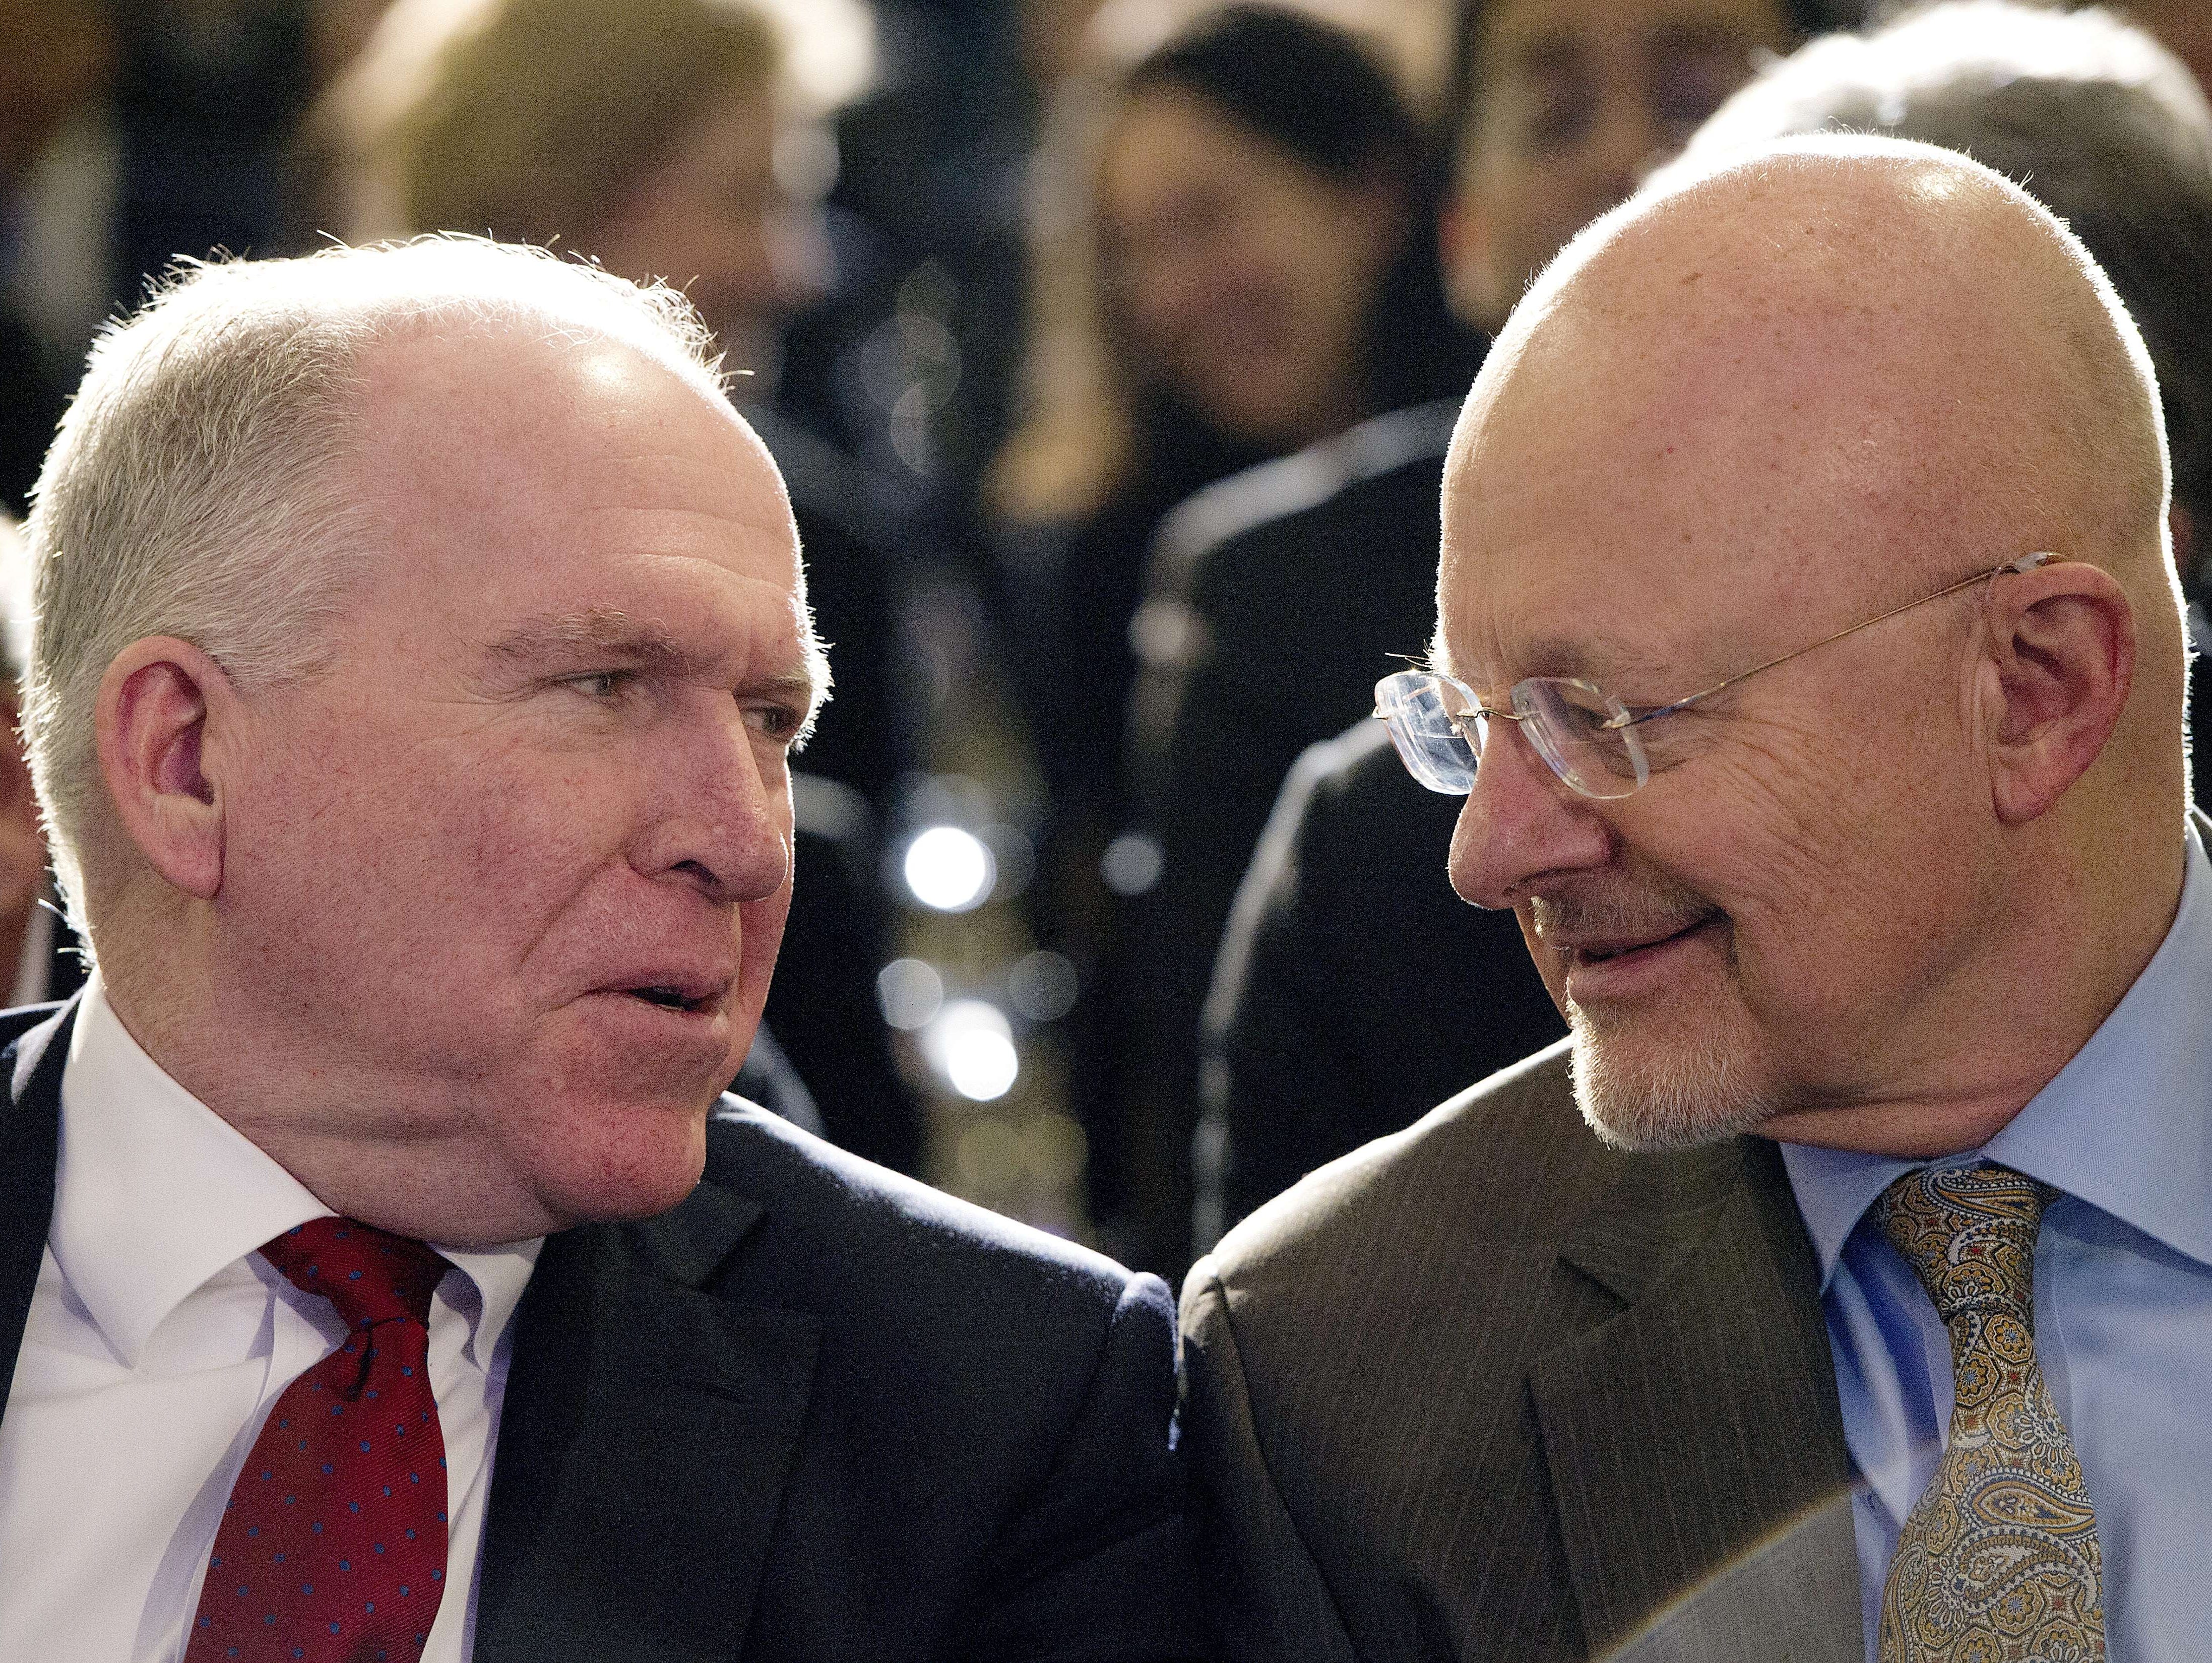 Director of the Central Intelligence Agency (CIA) John Brennan (left) talks with the Director of National Intelligence James Clapper  before President Obama spoke about the National Security Agency (NSA) and intelligence agencies surveillance techniq